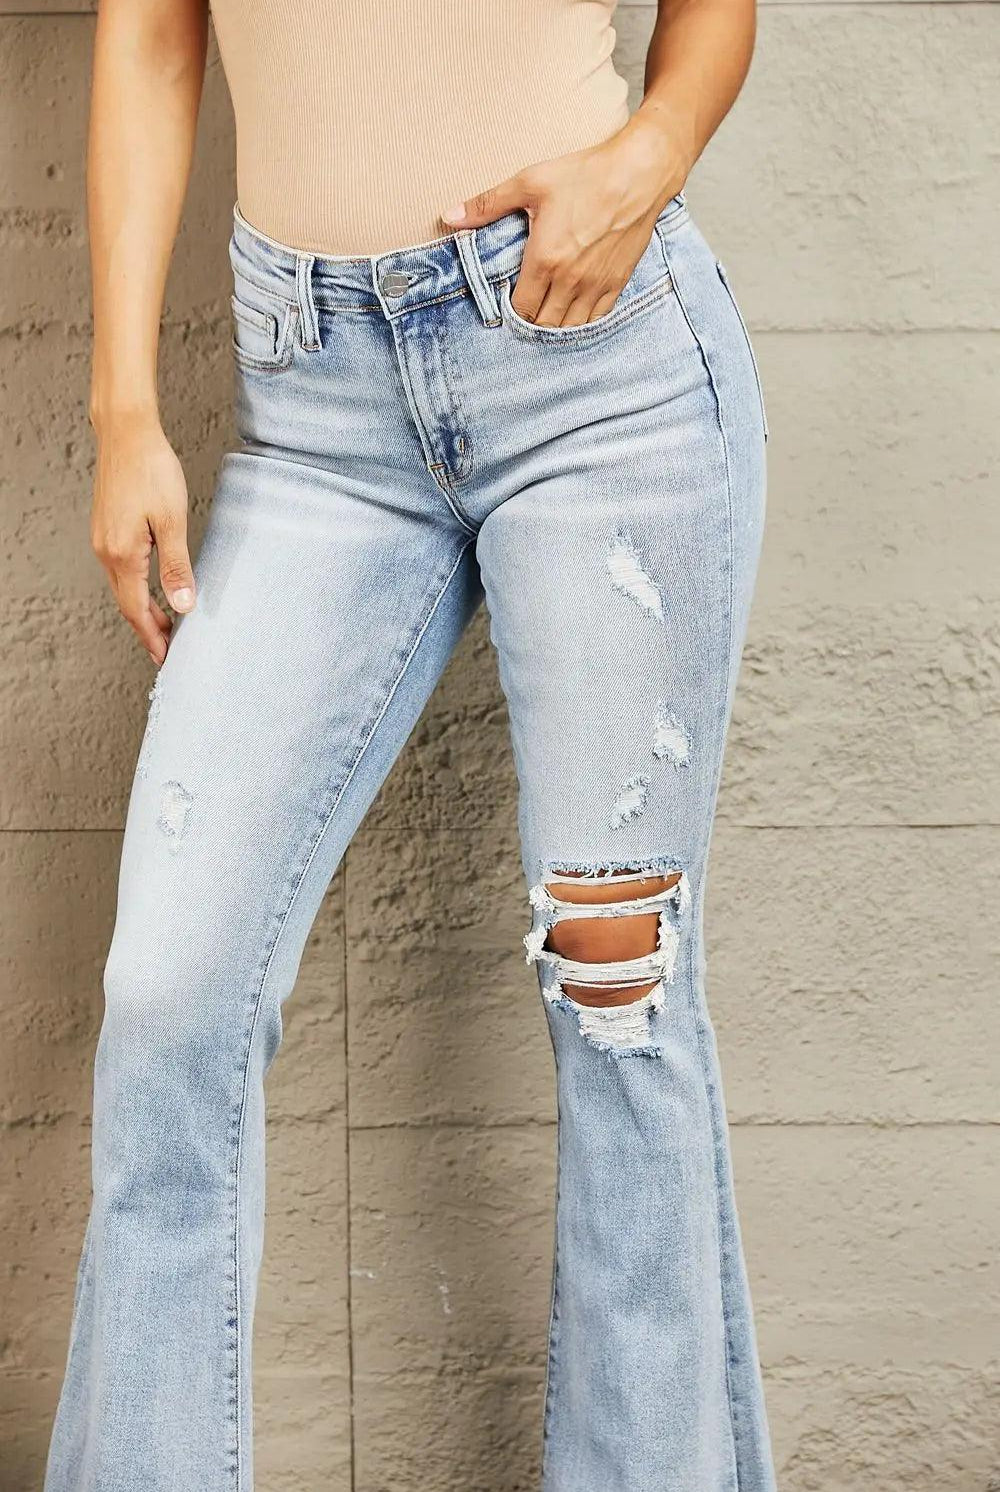 BAYEAS Mid Rise Distressed Flare Jeans - Elena Rae Co.